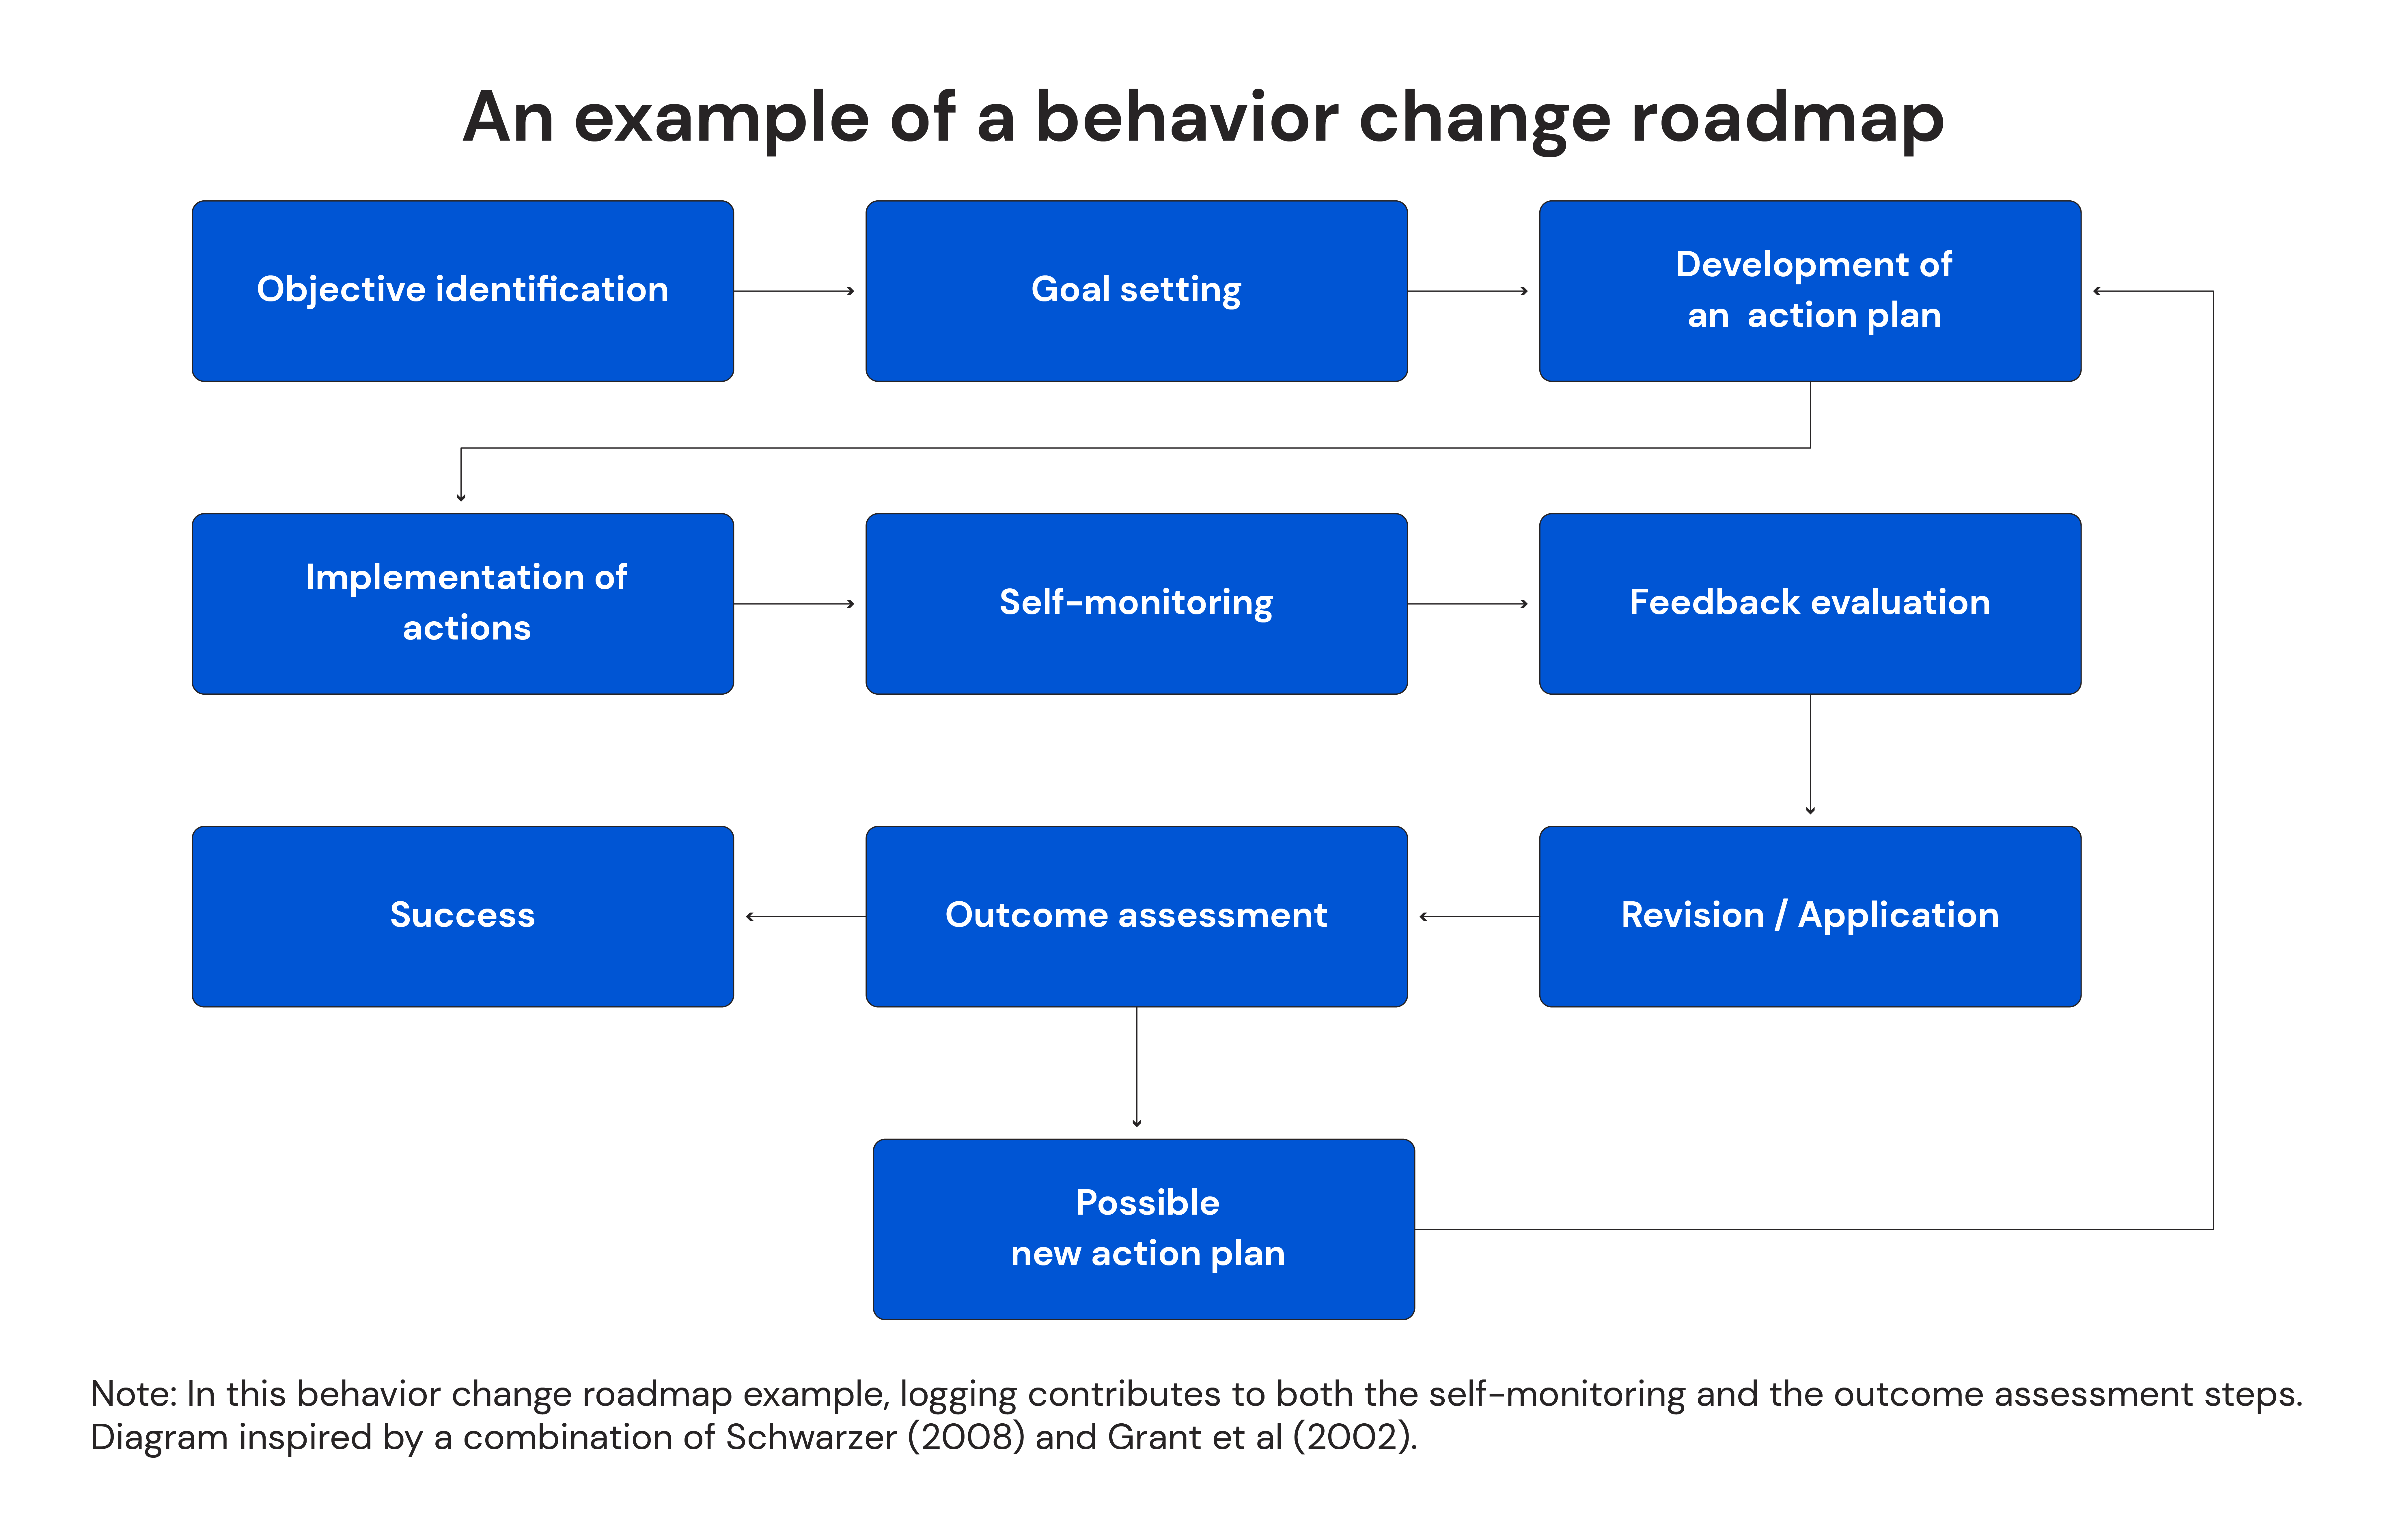 An example of a behavior change roadmap